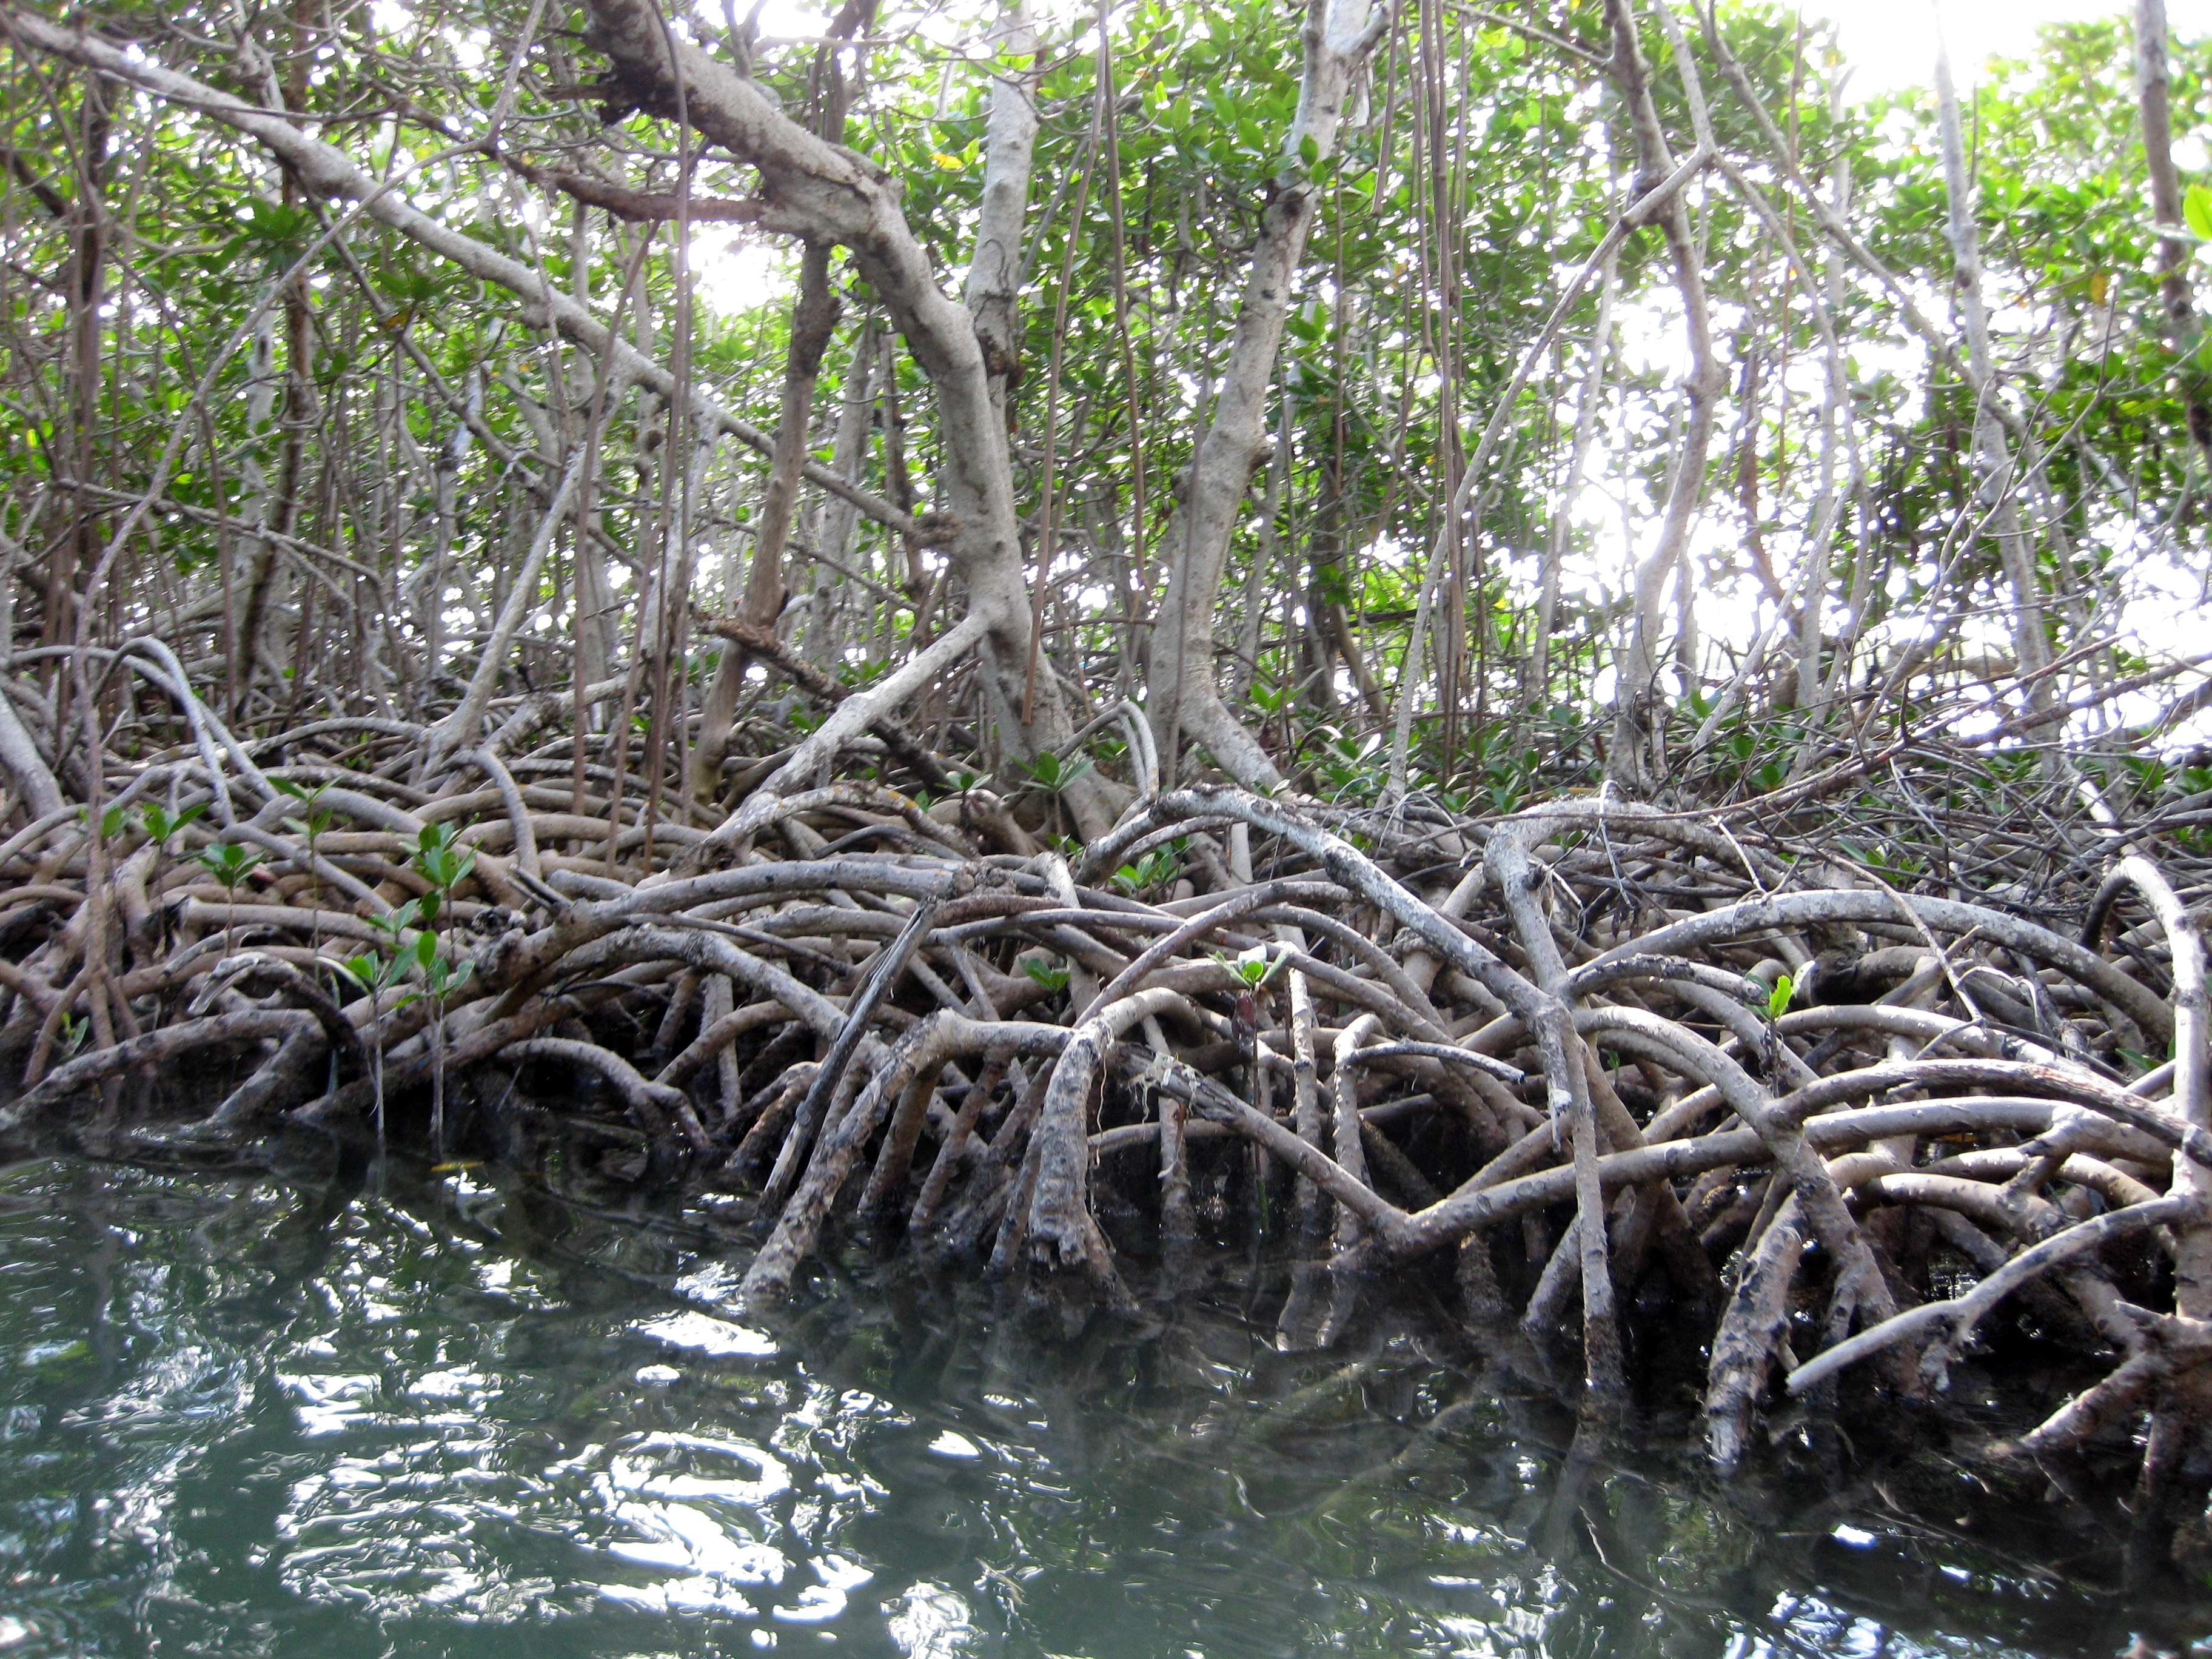 Mangrove roots press in close as we go through a narrow channel.